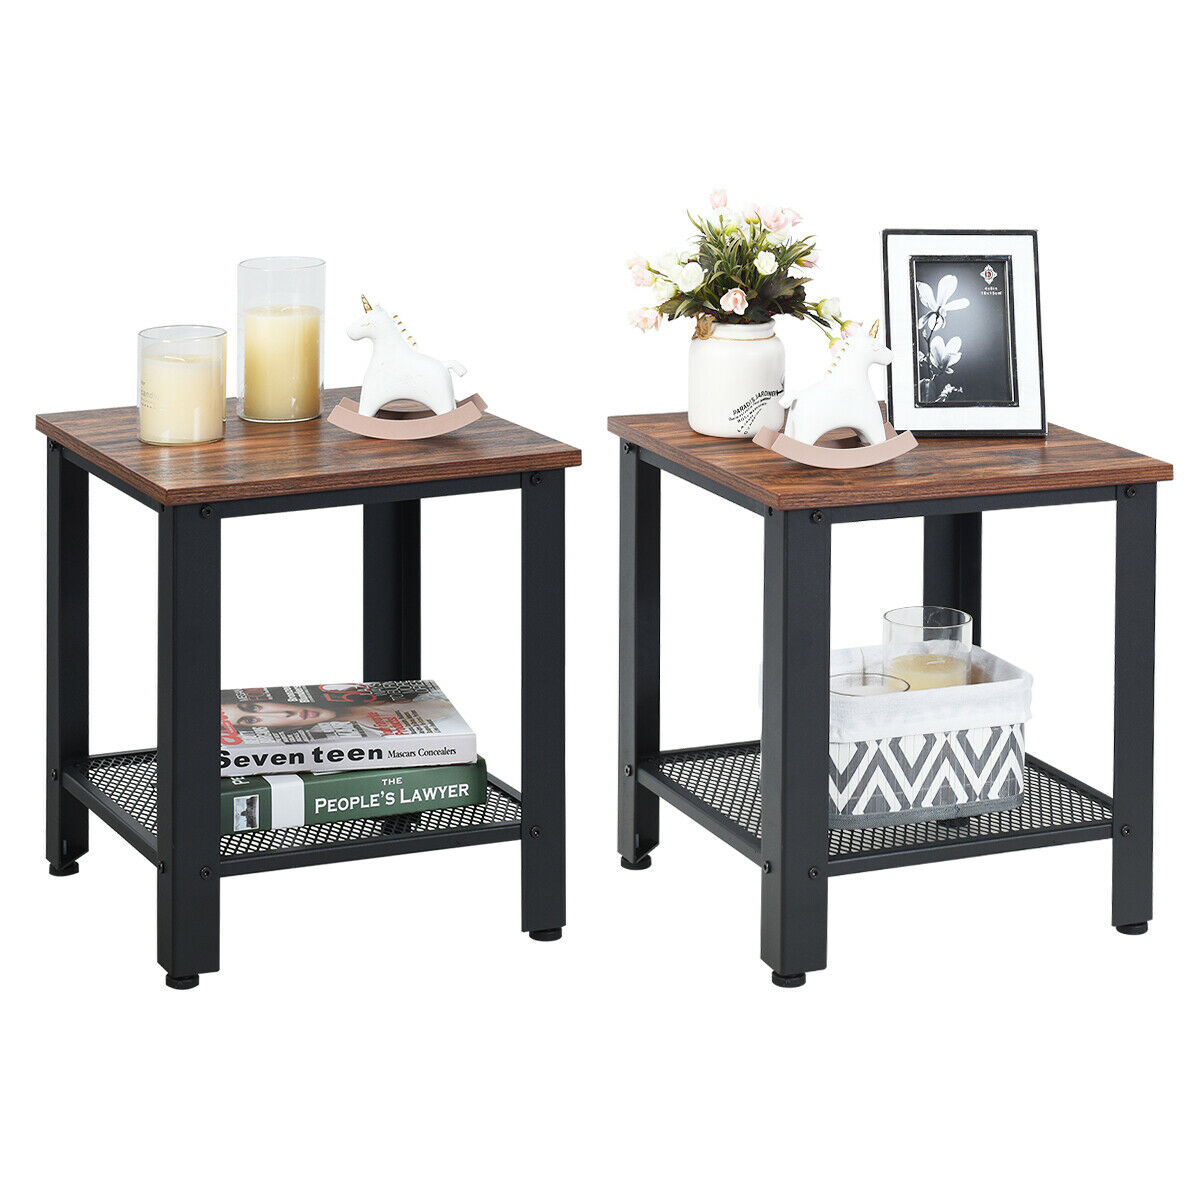 Set Of 2 Industrial End Table 2Tier Side Table W/Storage Shelf Sofa Table - Black